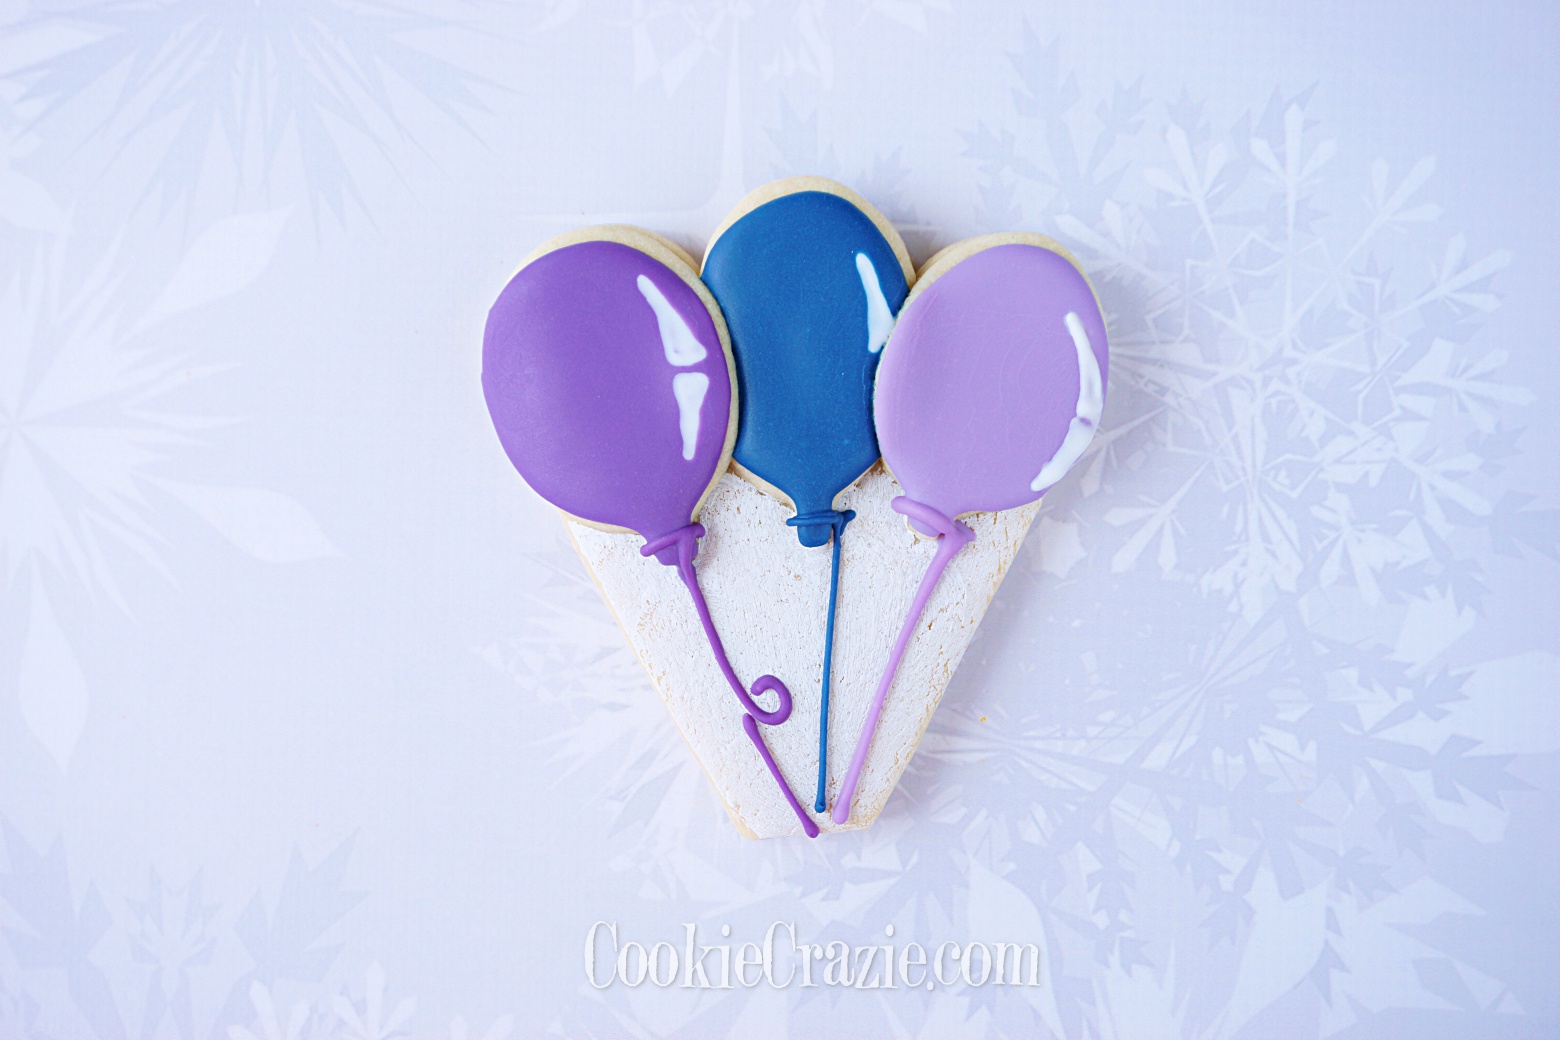  Trio Balloon Decorated Sugar Cookie YouTube video HERE 